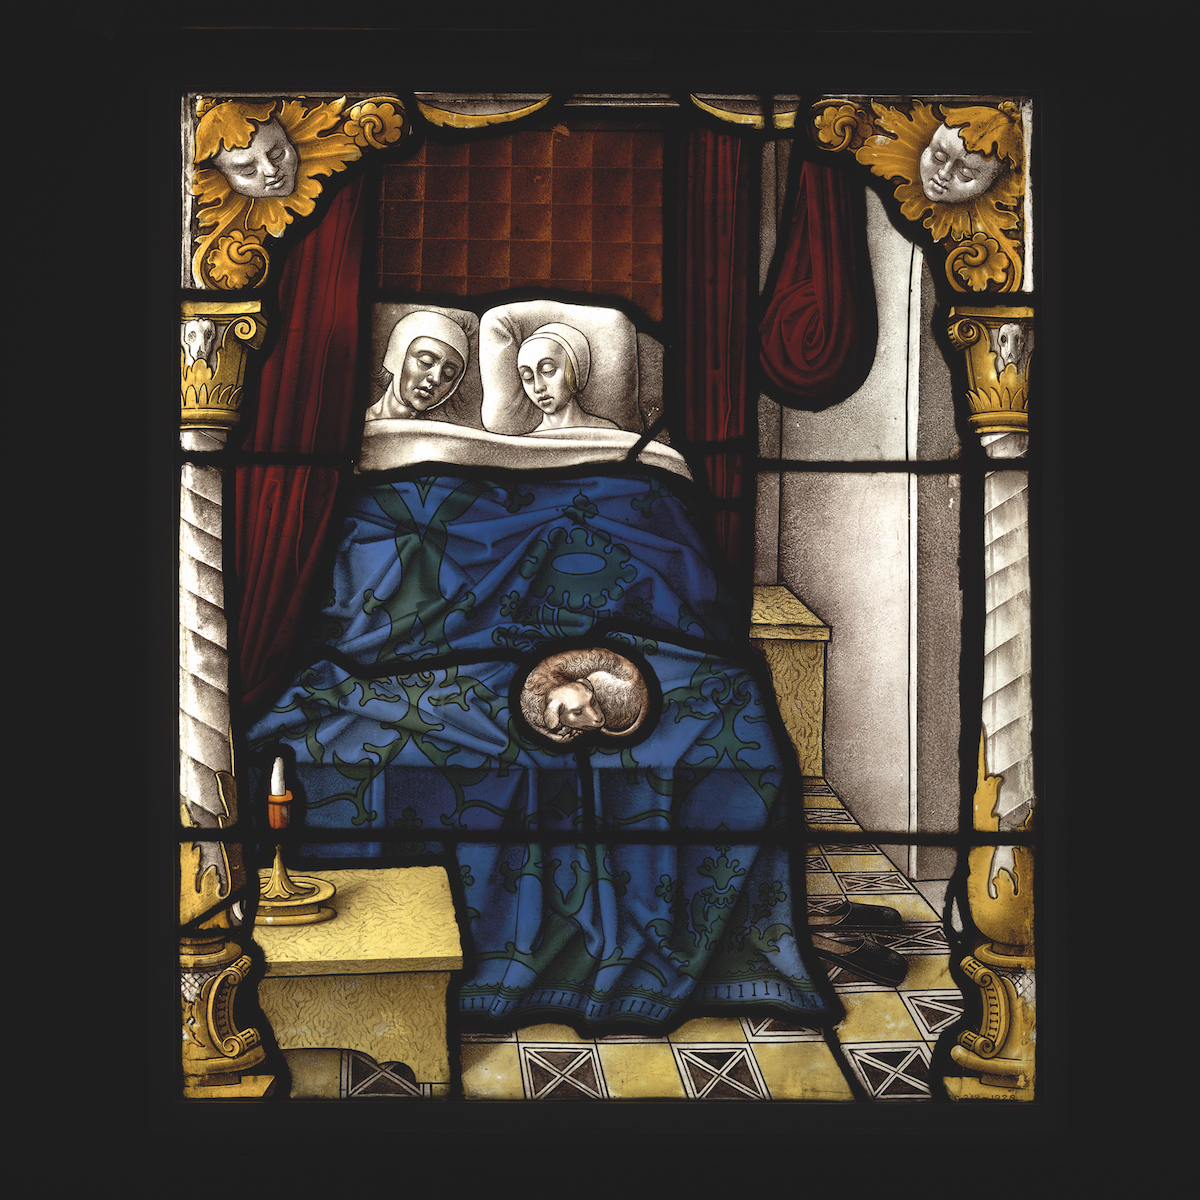 Tobias and Sara on their Wedding Night, about 1520, Cologne, Germany, stained-glass pane © VICTORIA AND ALBERT MUSEUM, LONDON